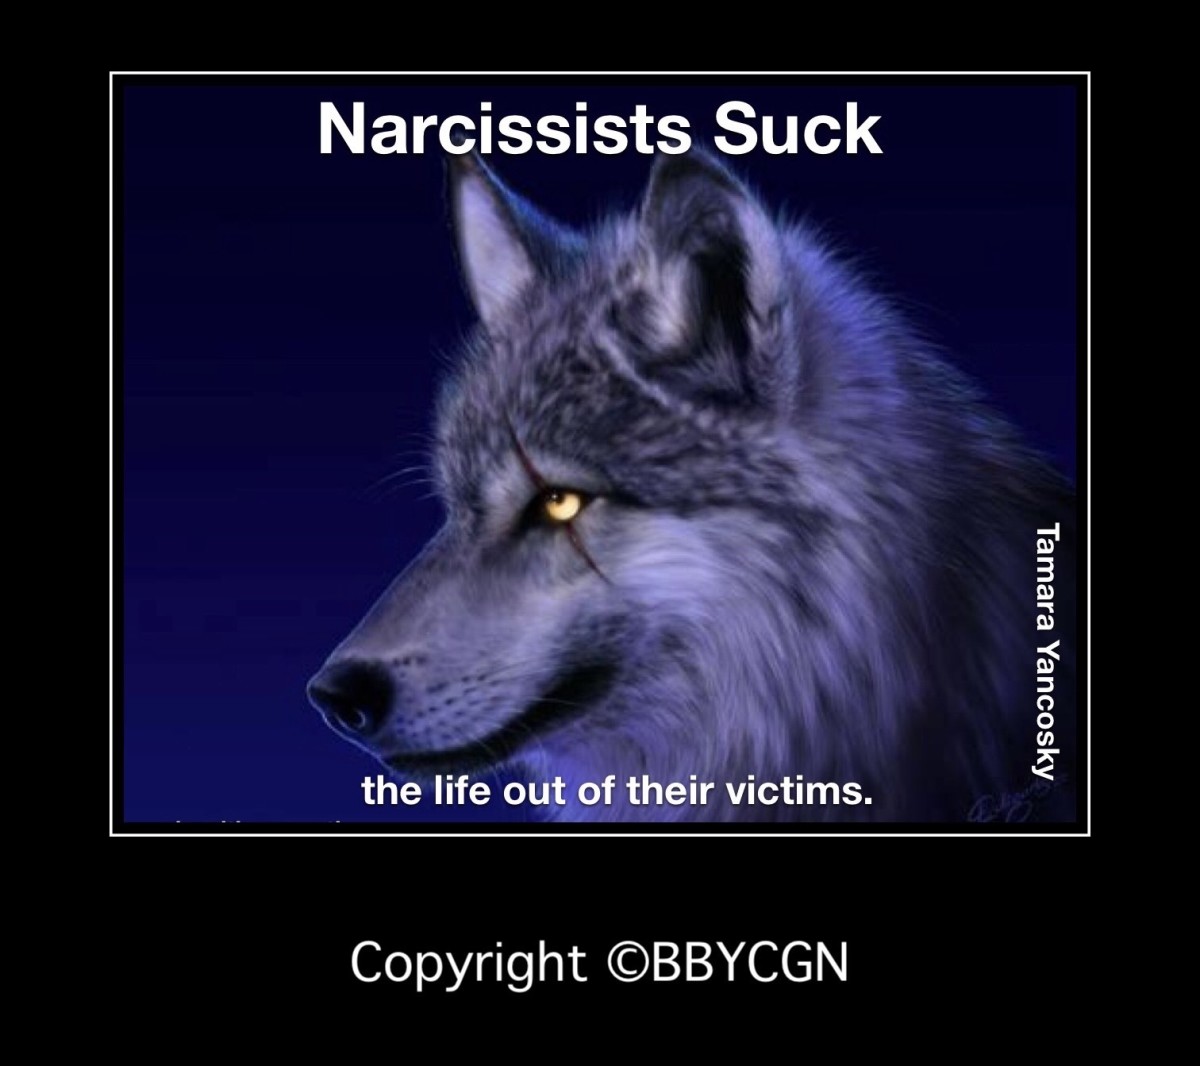 Creative Quotes on Covert Narcissistic Abuse - Created by: Tamara Yancosky